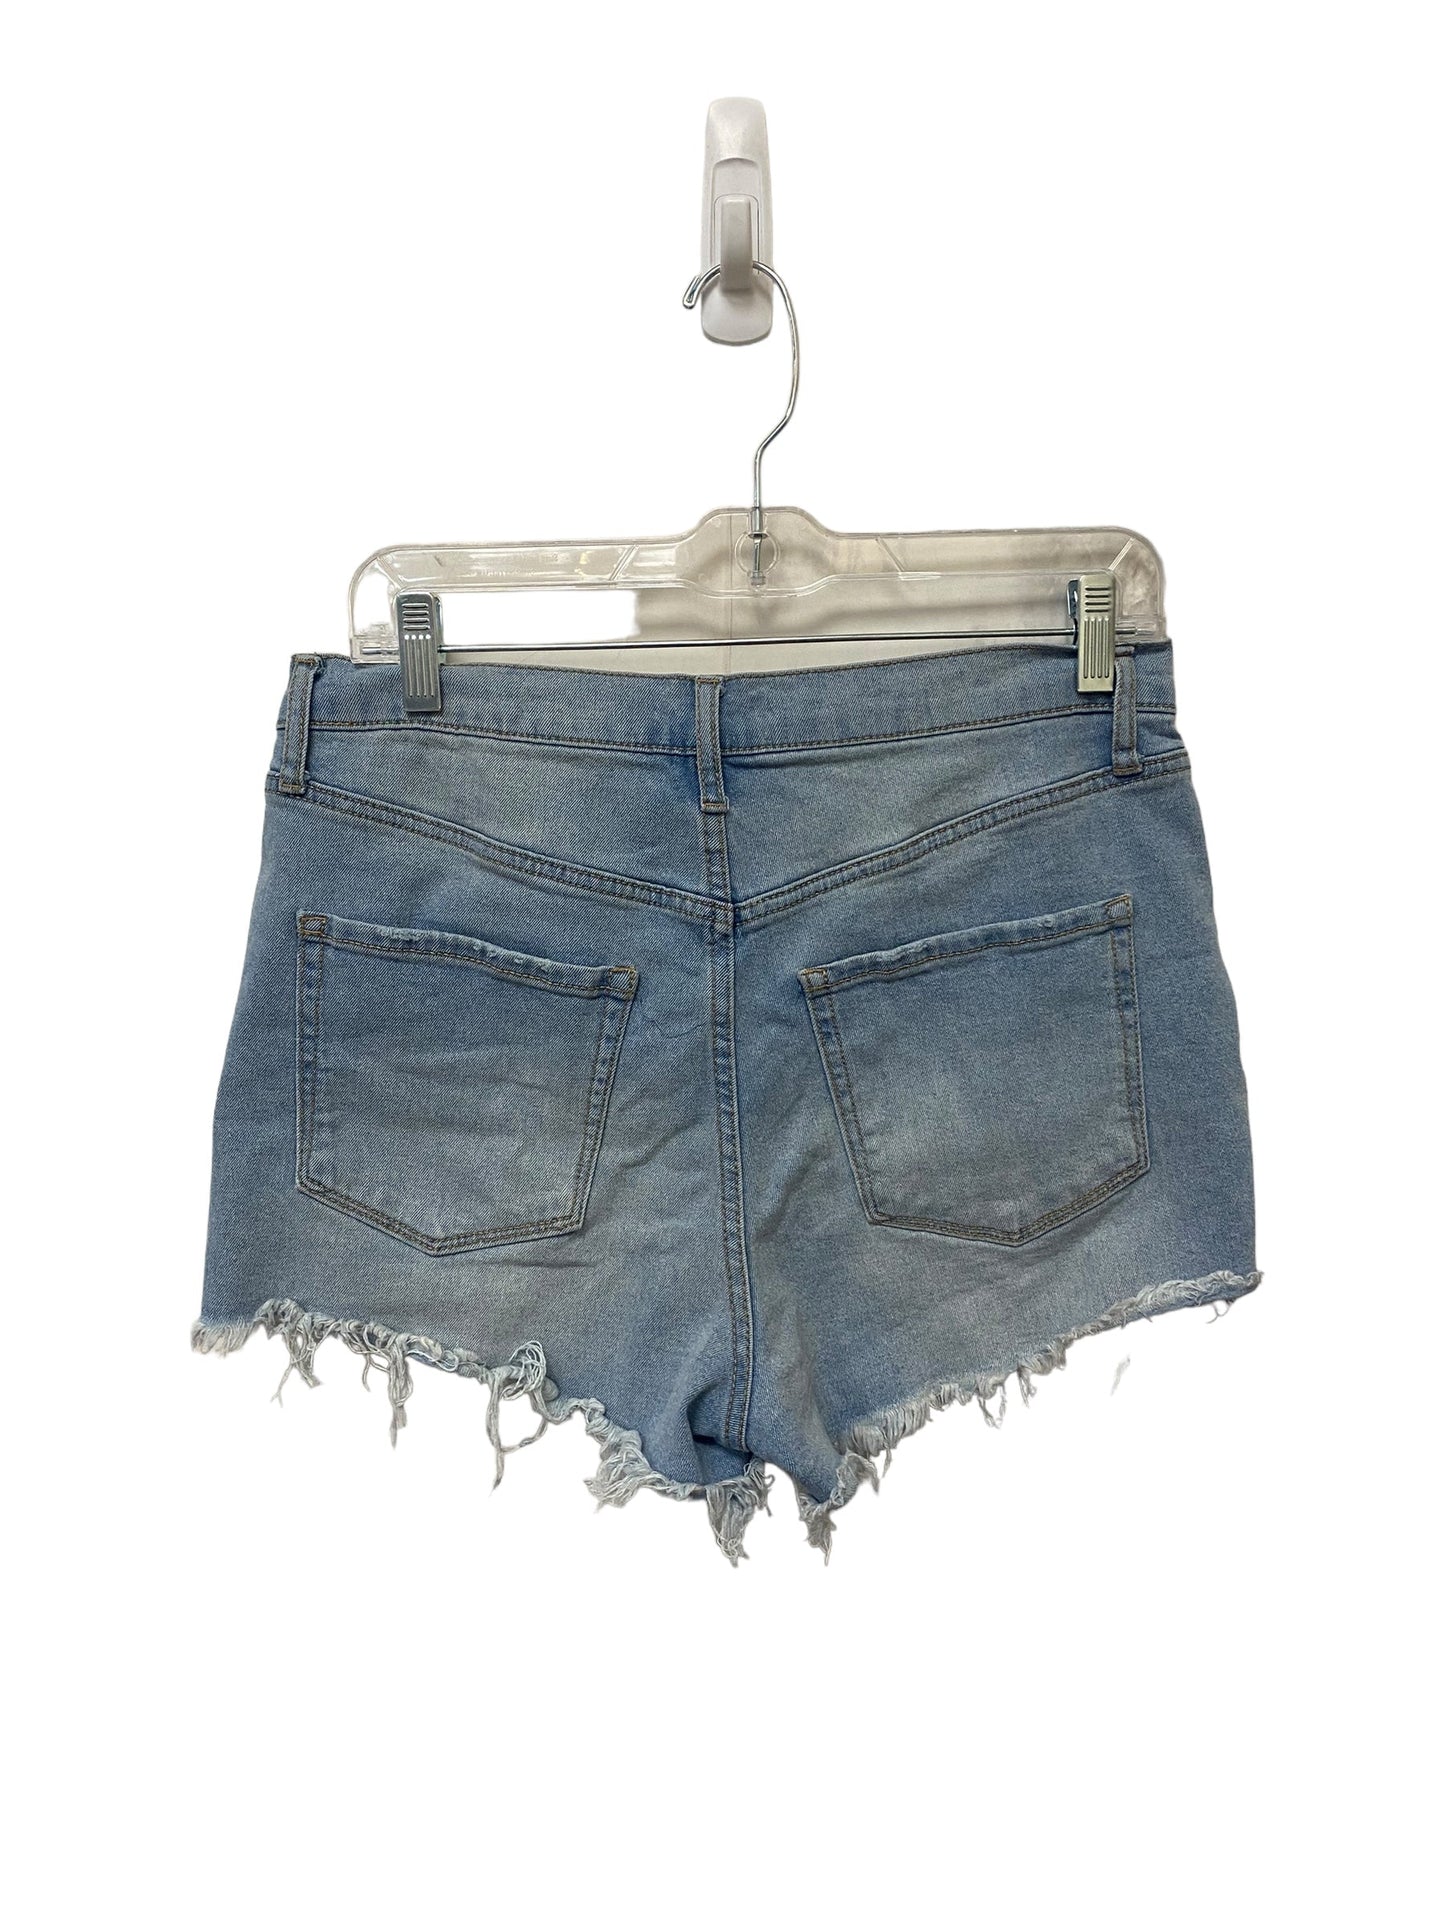 Shorts By Jessica Simpson  Size: 29